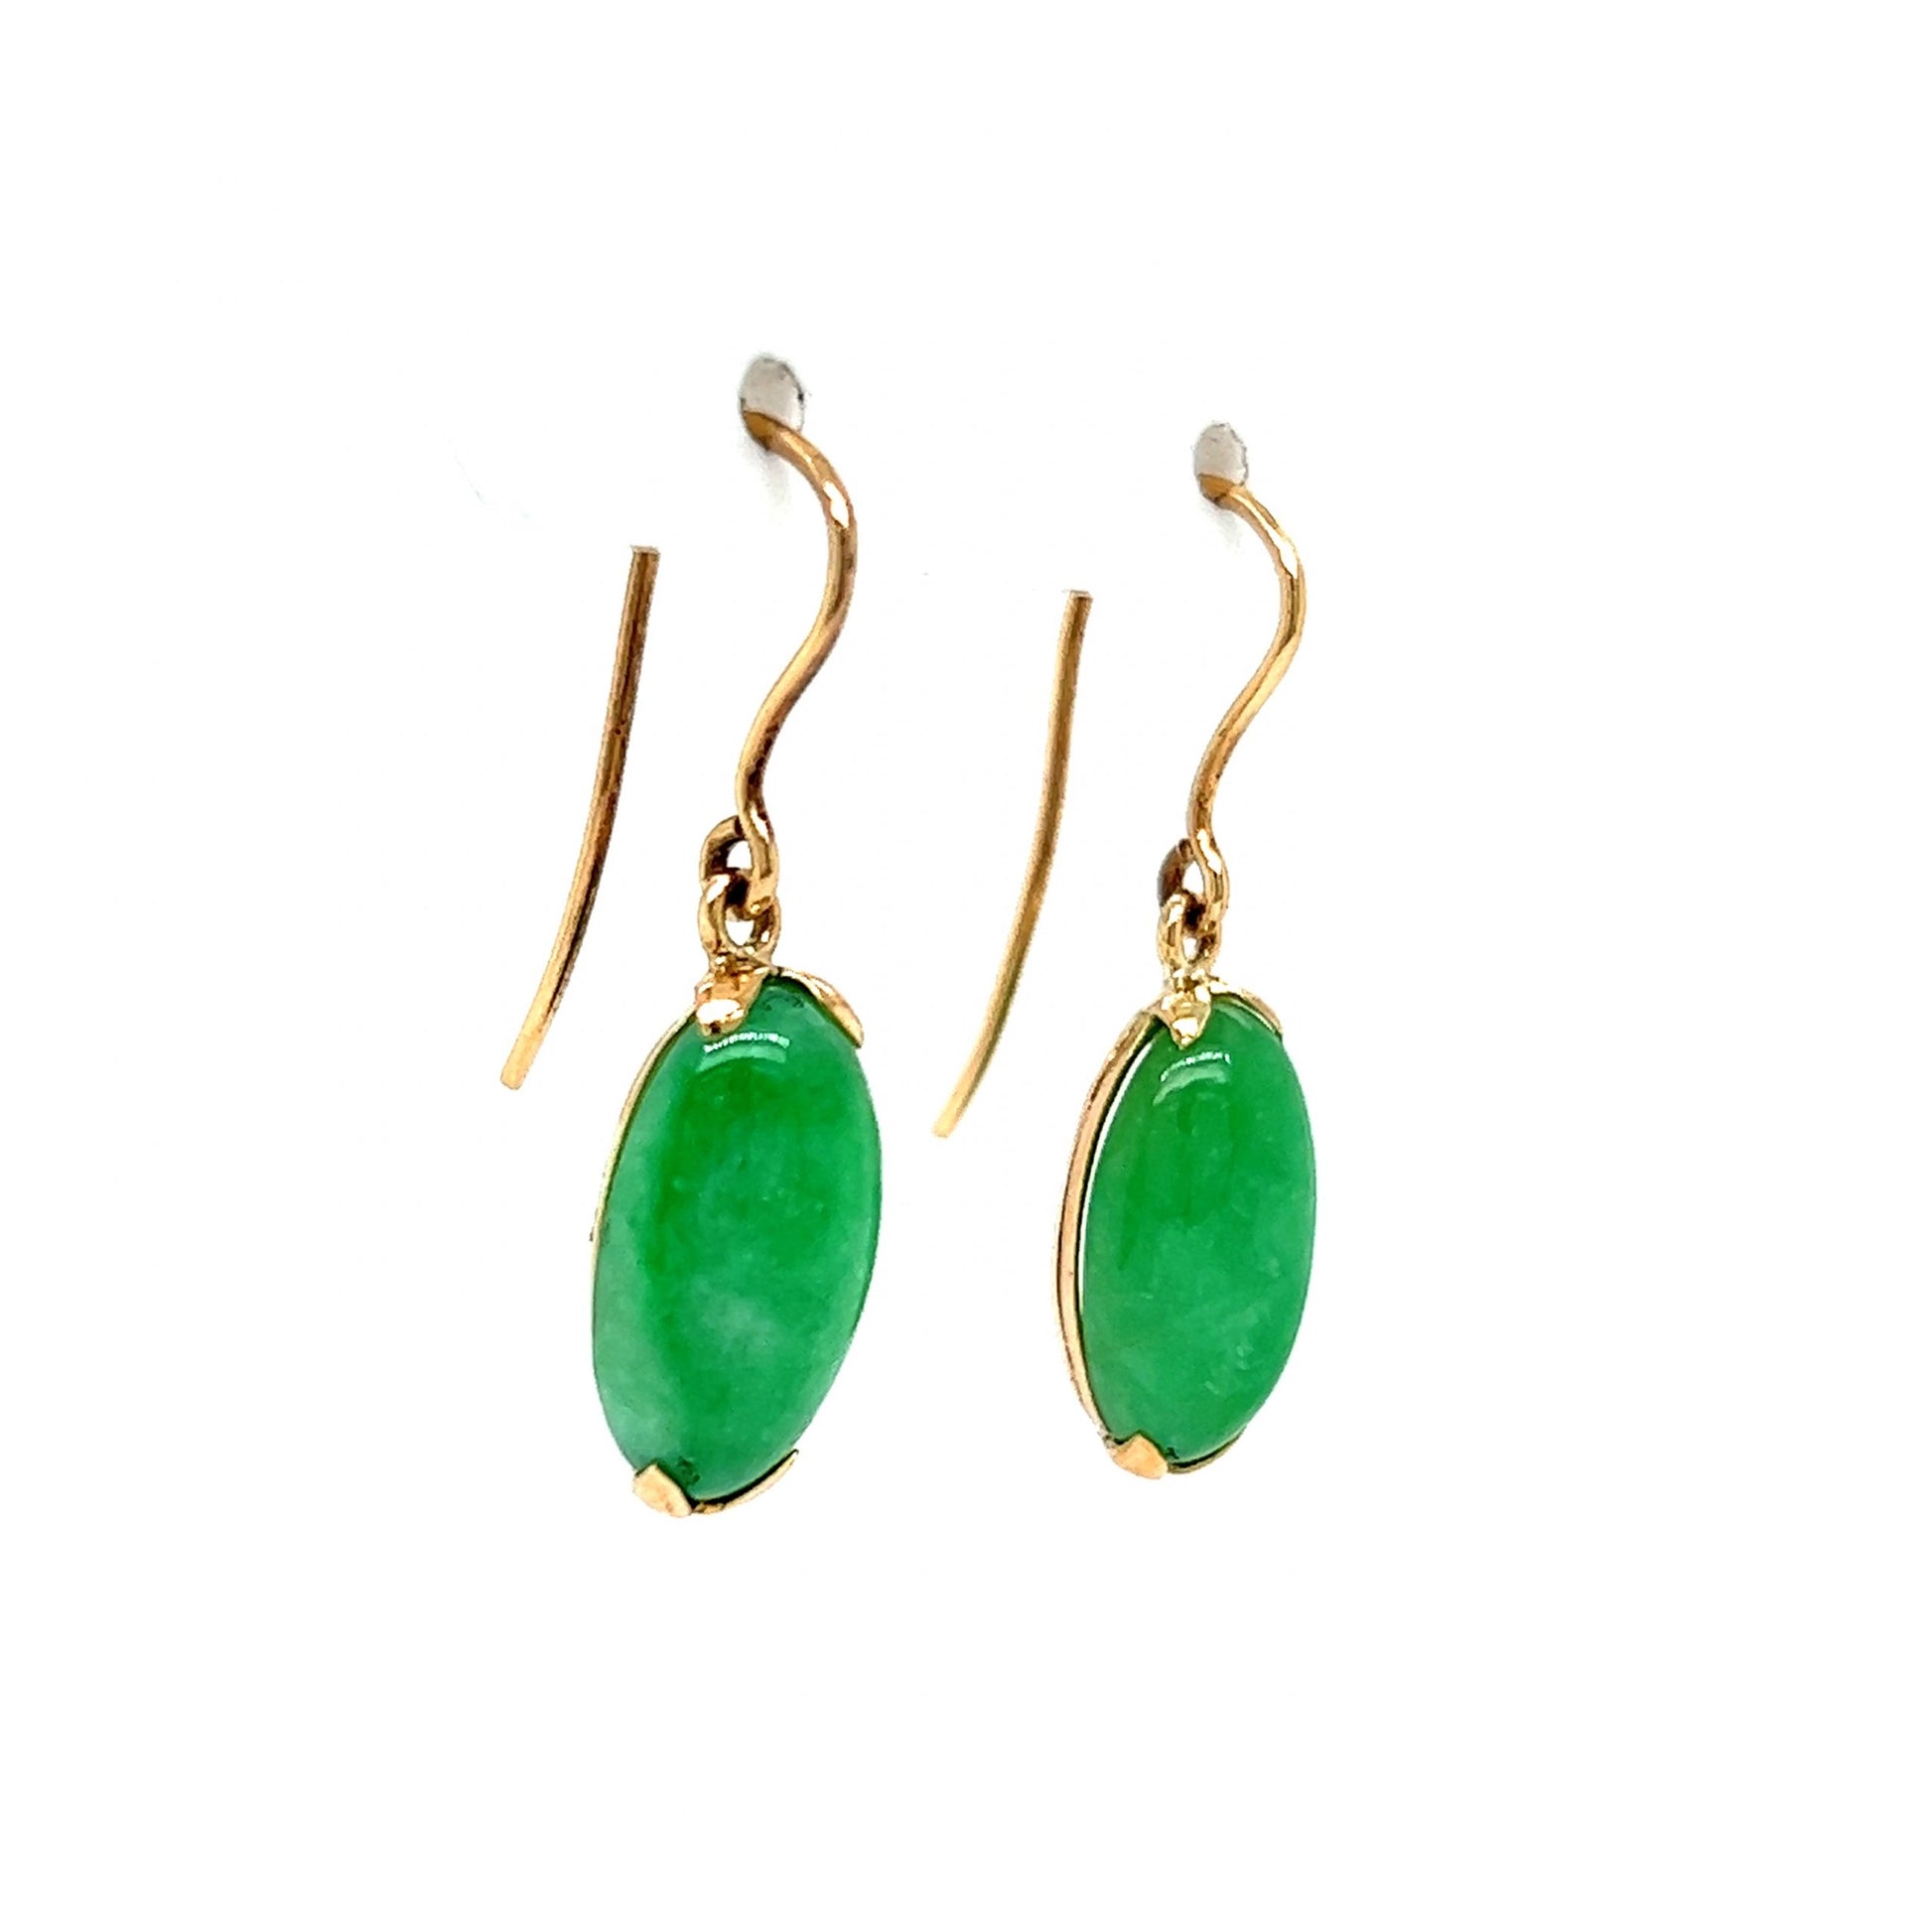 Oval Jade Drop Earrings in 14k Yellow GoldComposition: 14 Karat Yellow Gold Total Gram Weight: 3.0 g